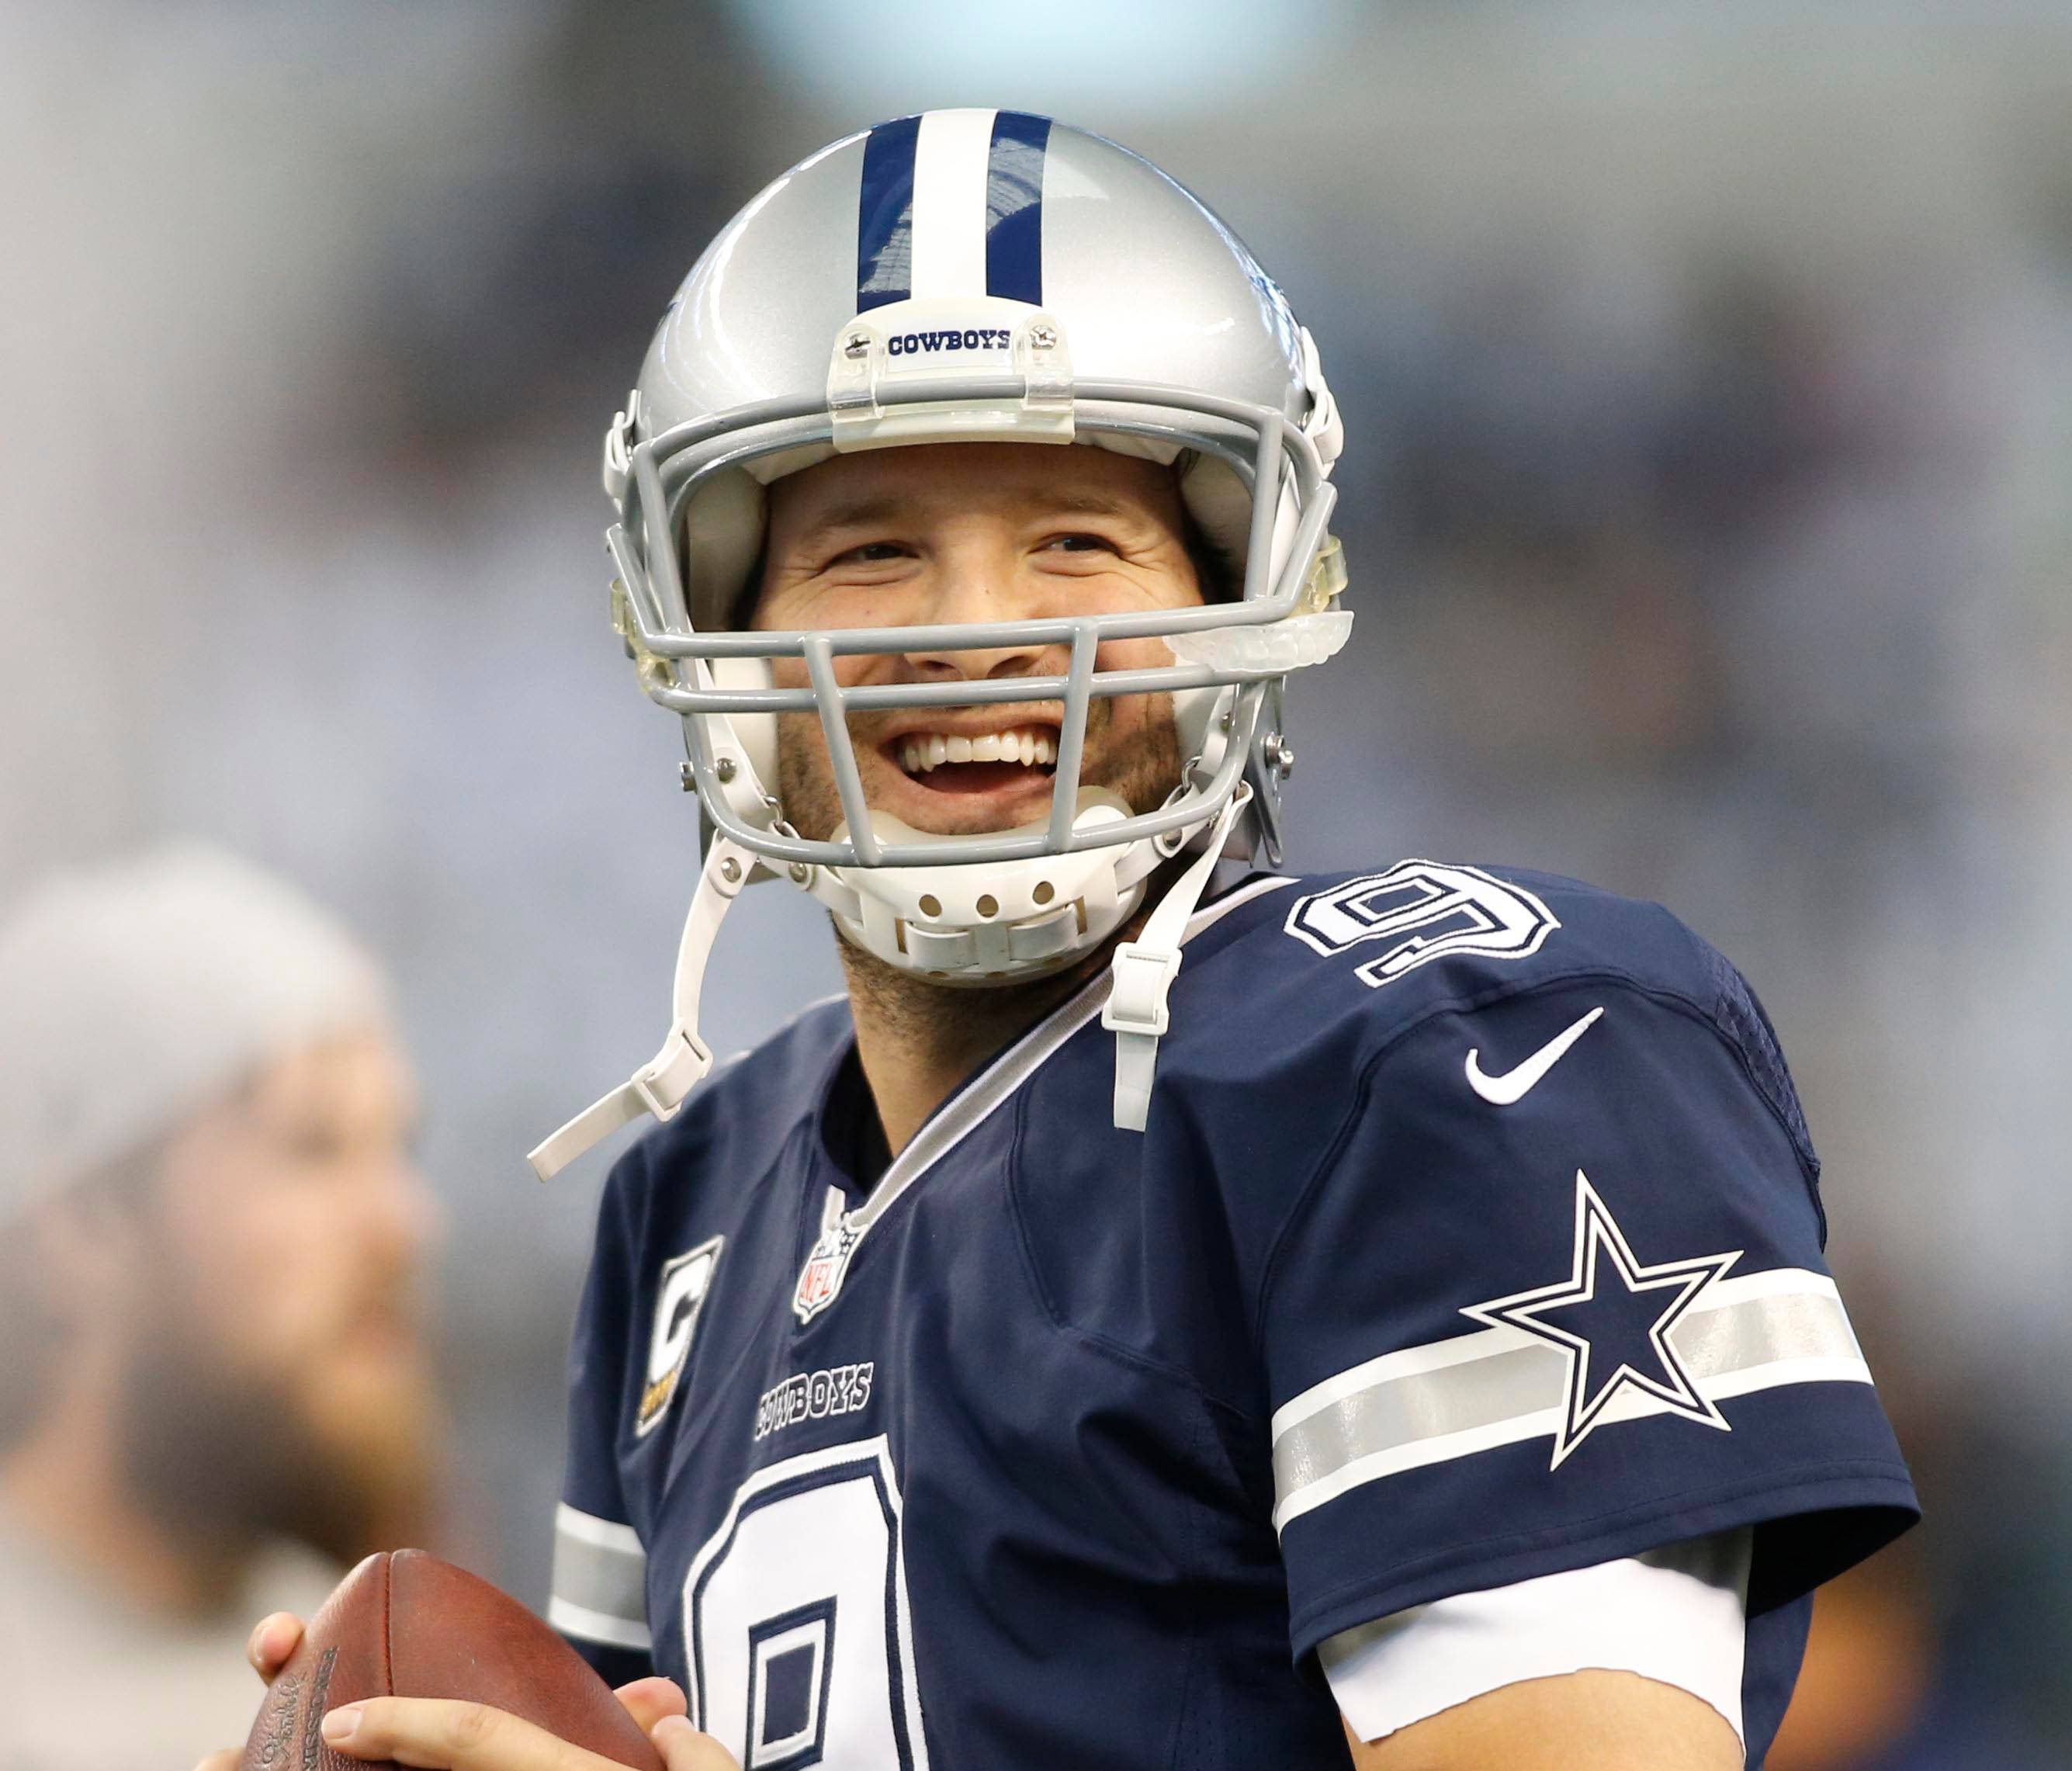 Dallas Cowboys quarterback Tony Romo (9) warms up before the game against the Philadelphia Eagles at AT&T Stadium.